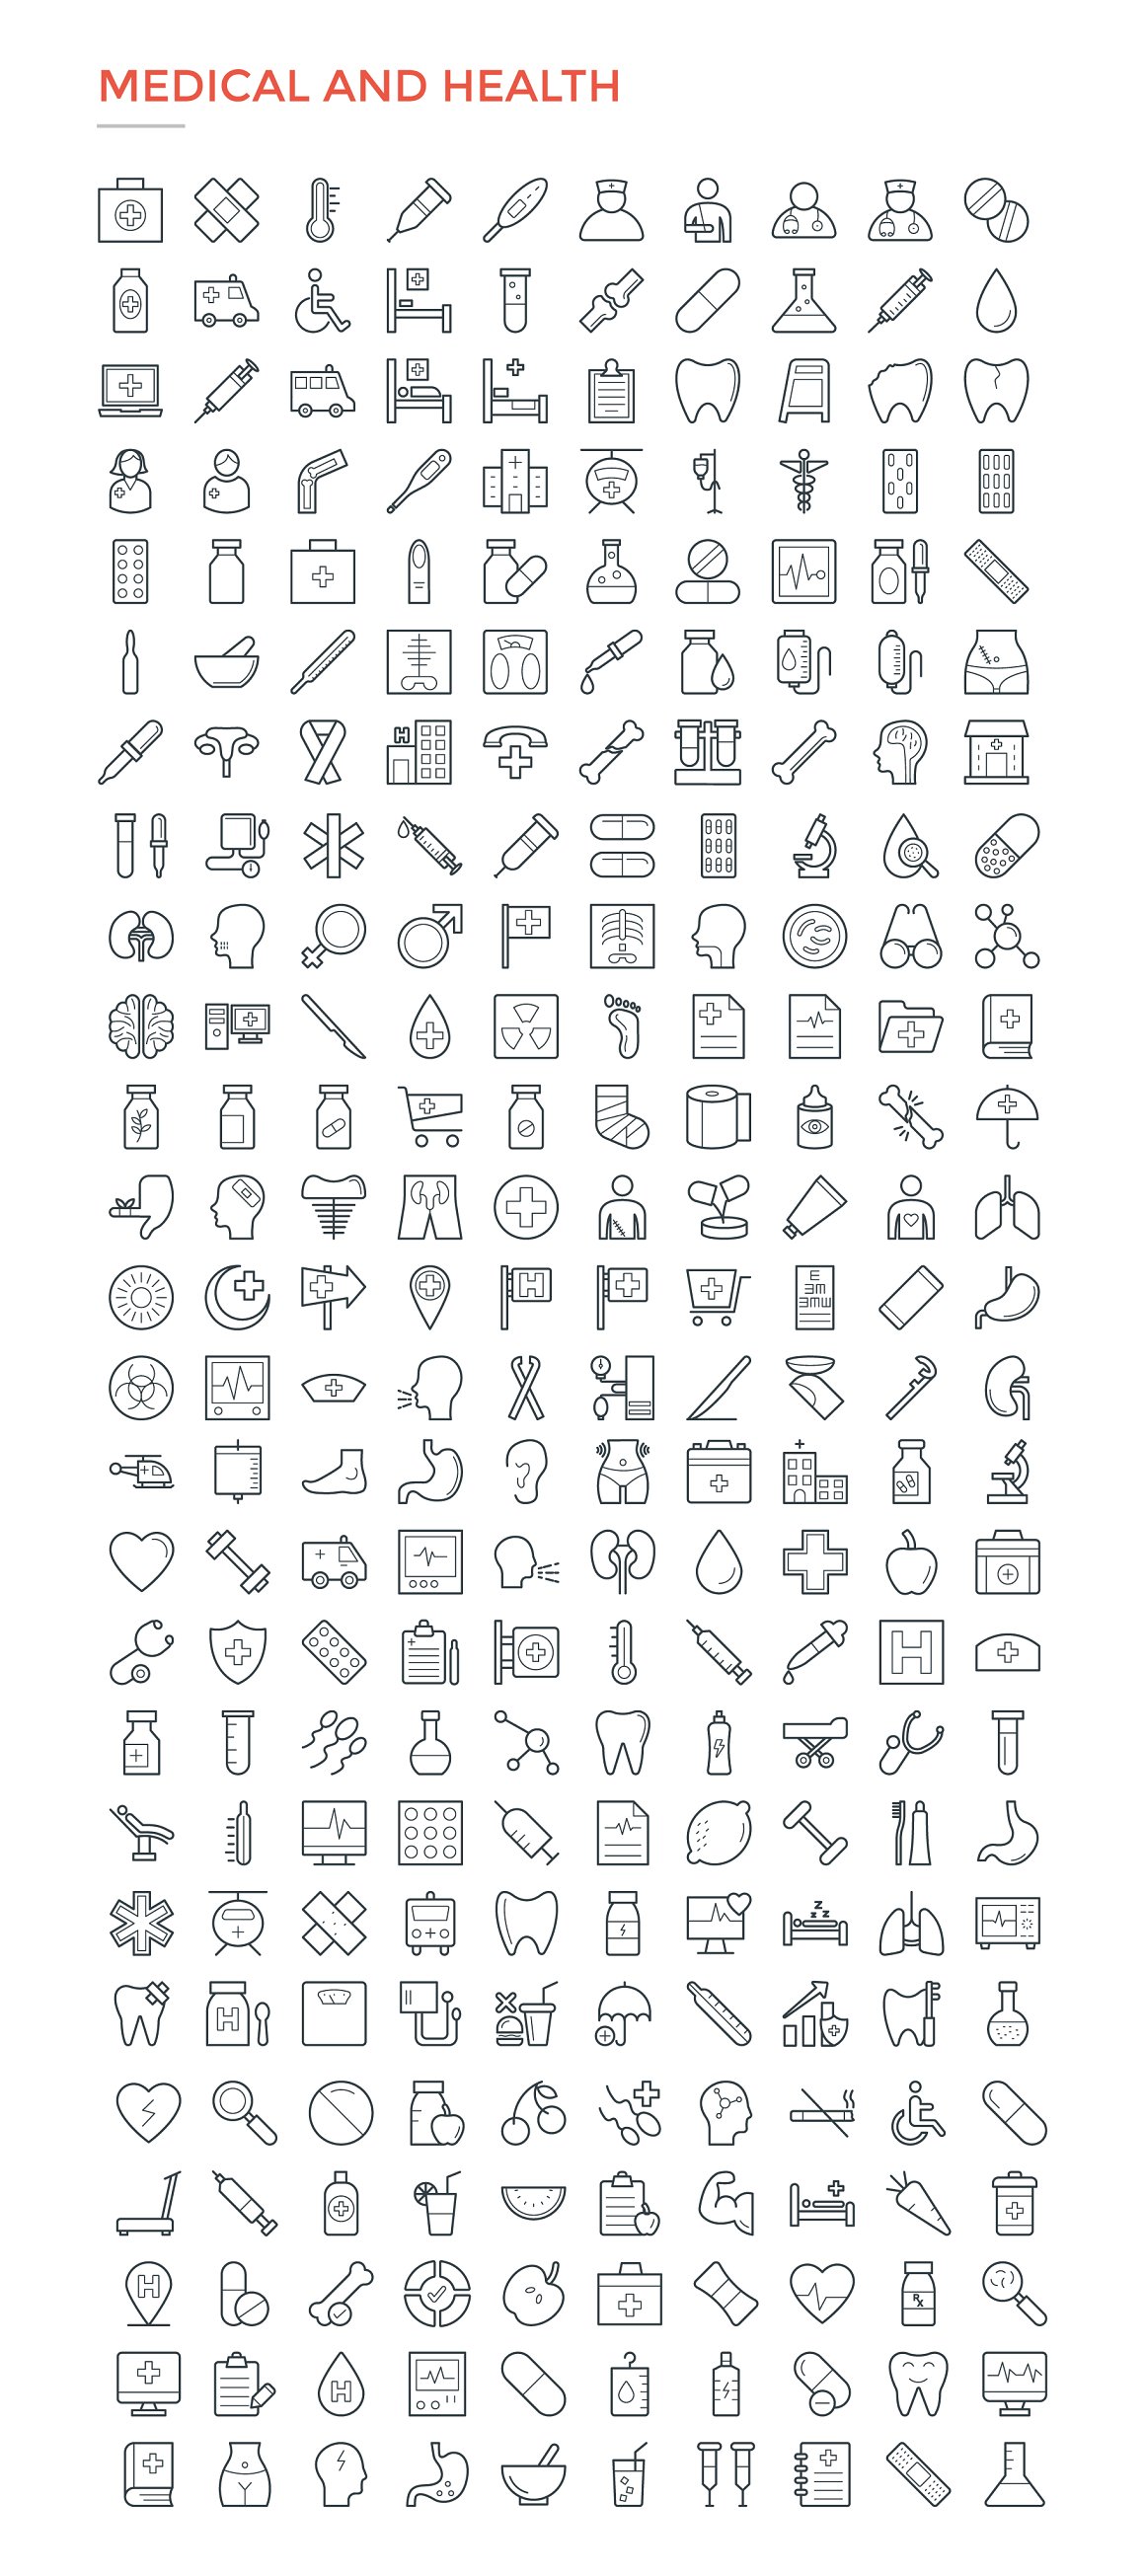 Medical and health black icons on a white background.